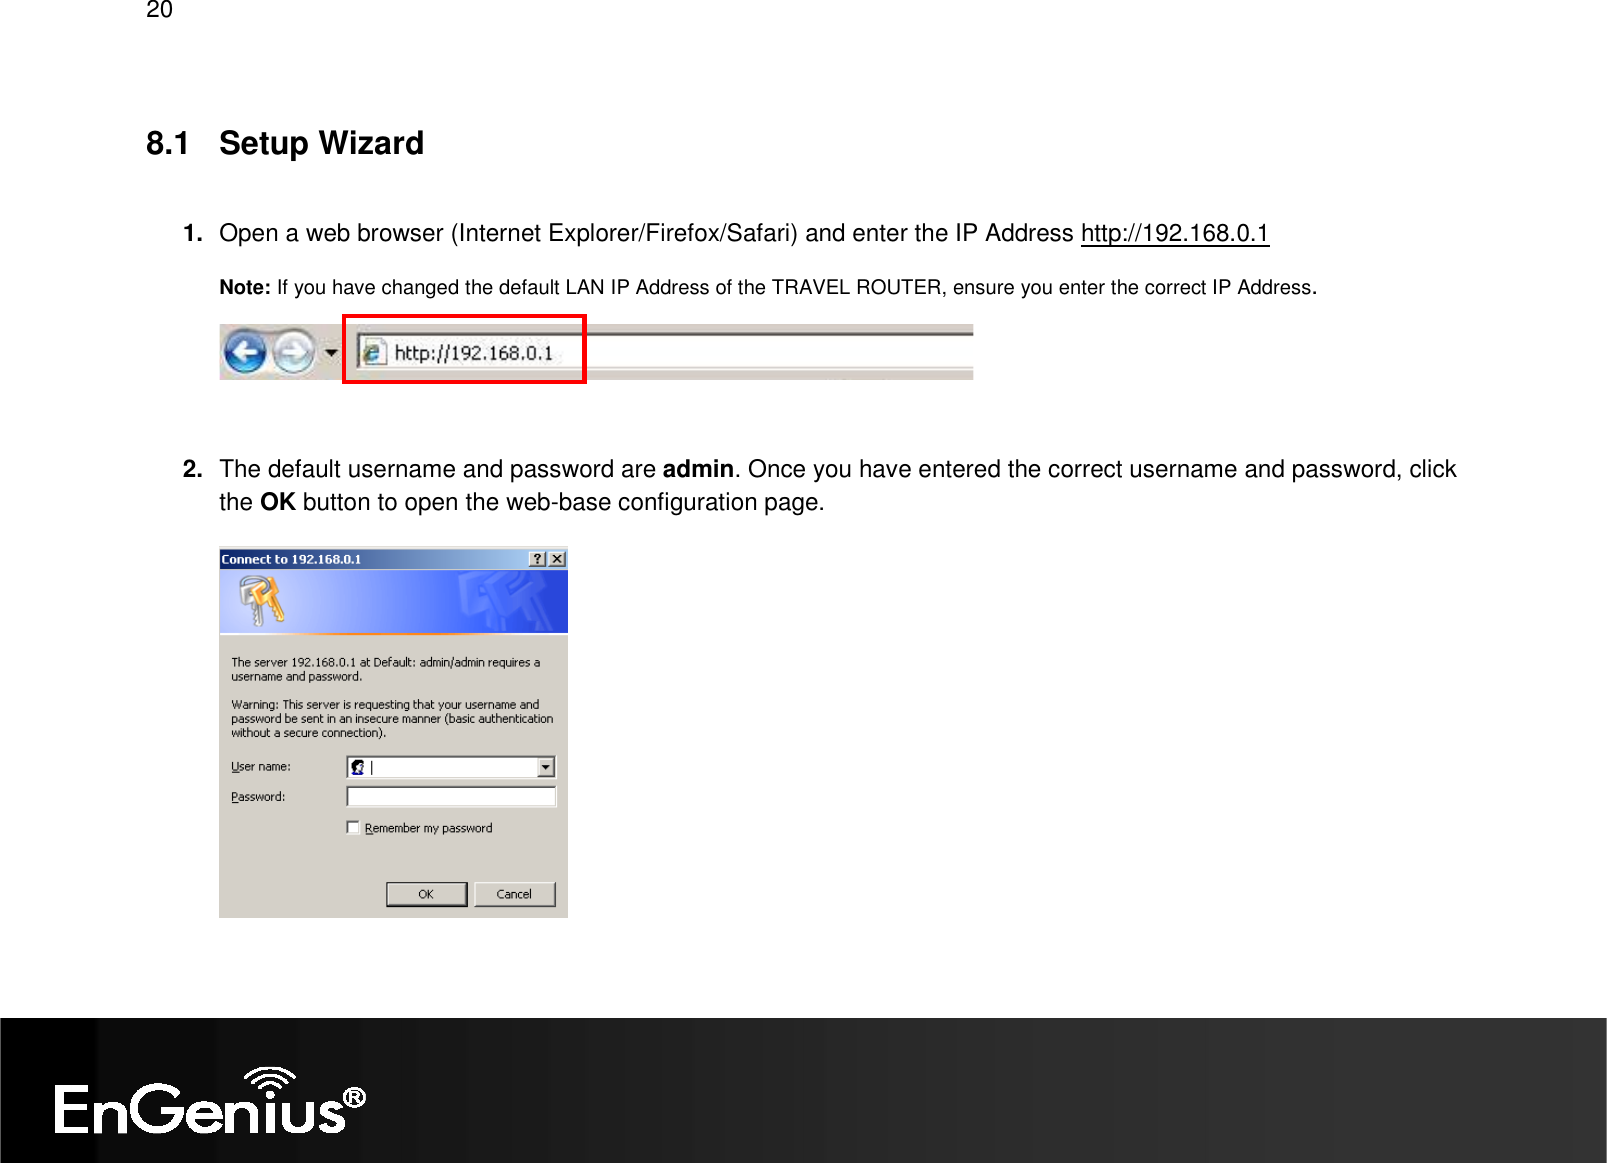   20  8.1  Setup Wizard  1.  Open a web browser (Internet Explorer/Firefox/Safari) and enter the IP Address http://192.168.0.1 Note: If you have changed the default LAN IP Address of the TRAVEL ROUTER, ensure you enter the correct IP Address.    2.  The default username and password are admin. Once you have entered the correct username and password, click the OK button to open the web-base configuration page.  